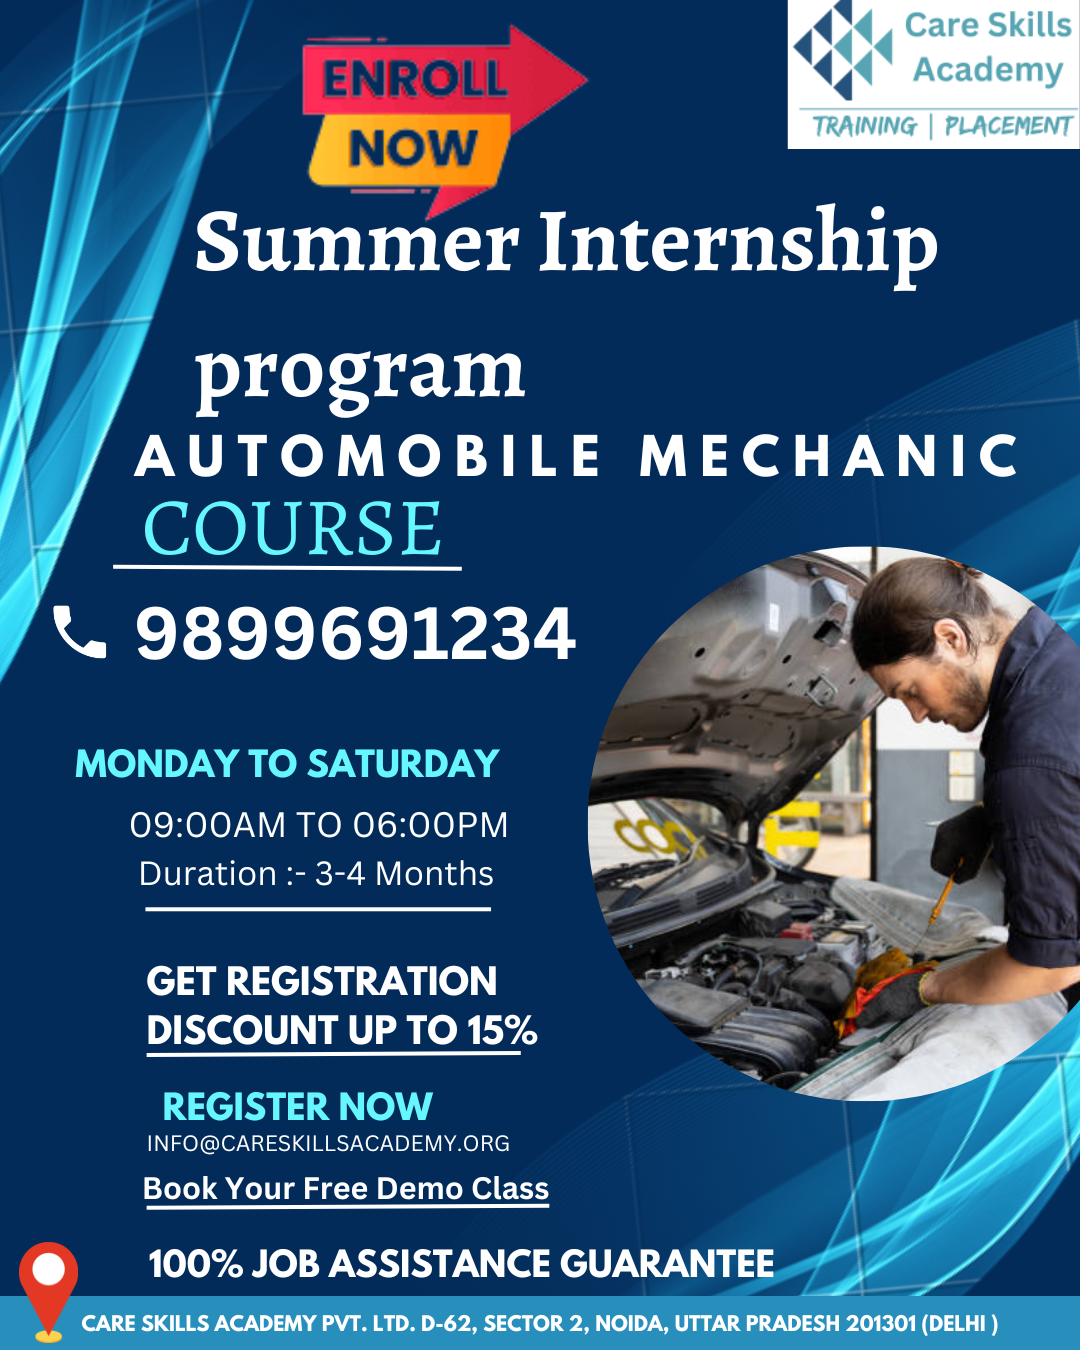 Join the Summer Internship Program in Automobile Mechanic Course at Care Skills Academy, Delhi